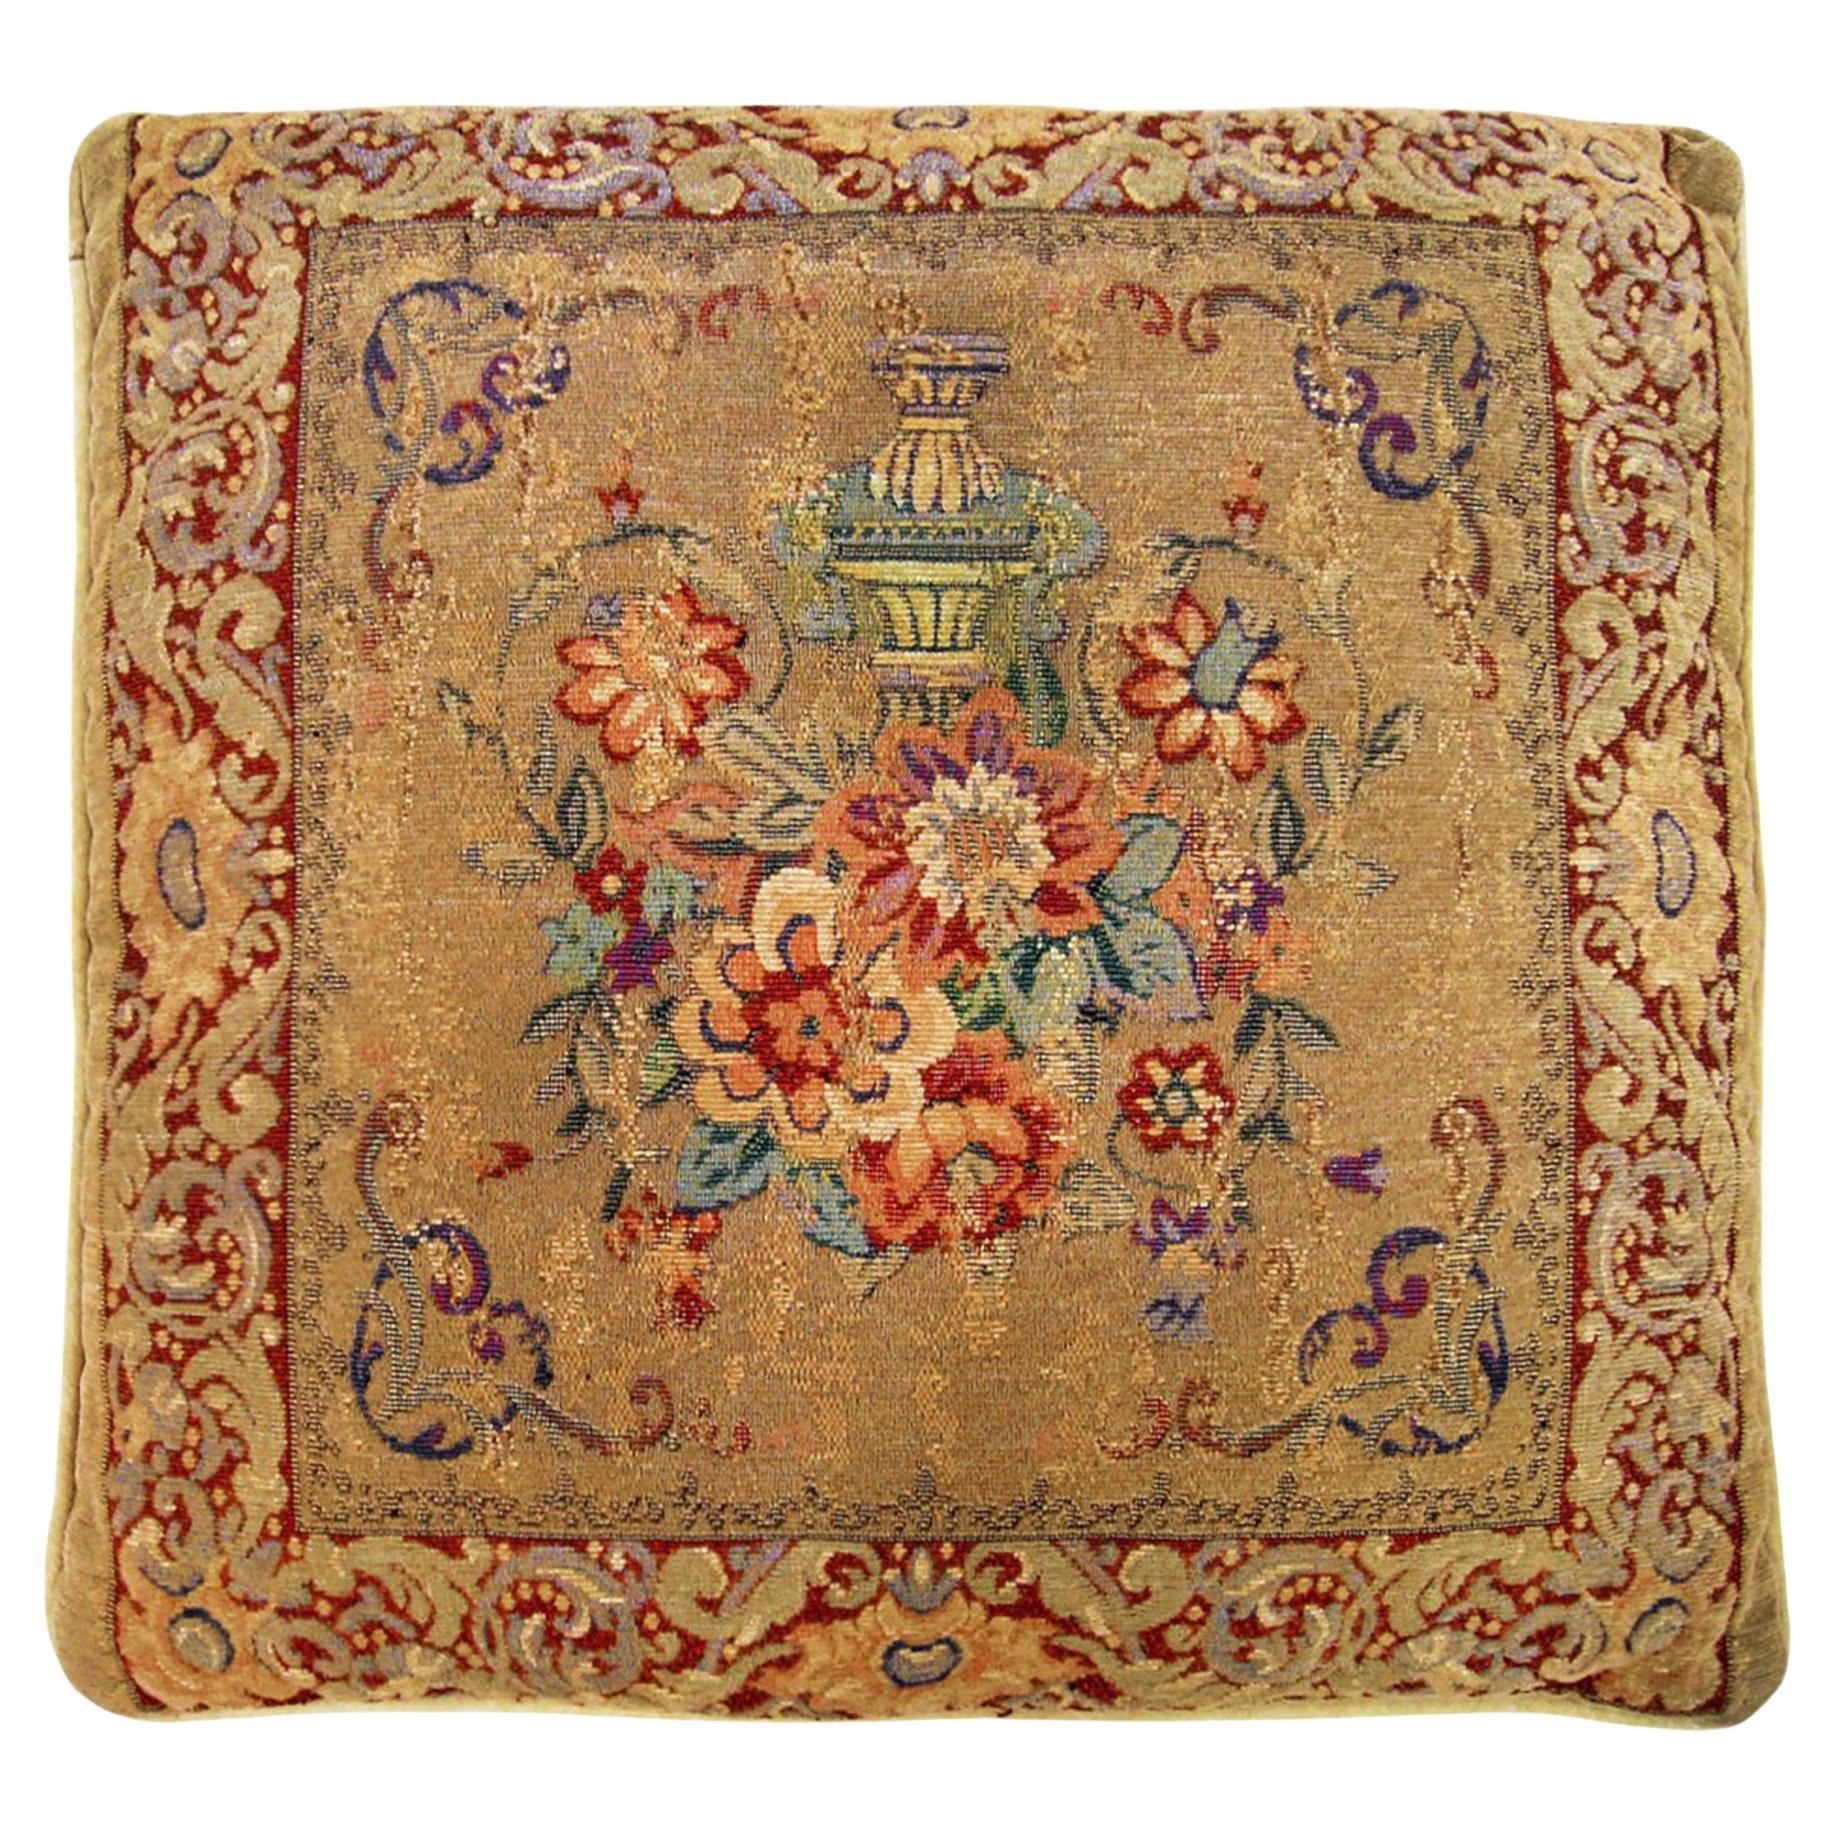 Decorative Vintage French Needlepoint Pillow with Floral Elements For Sale